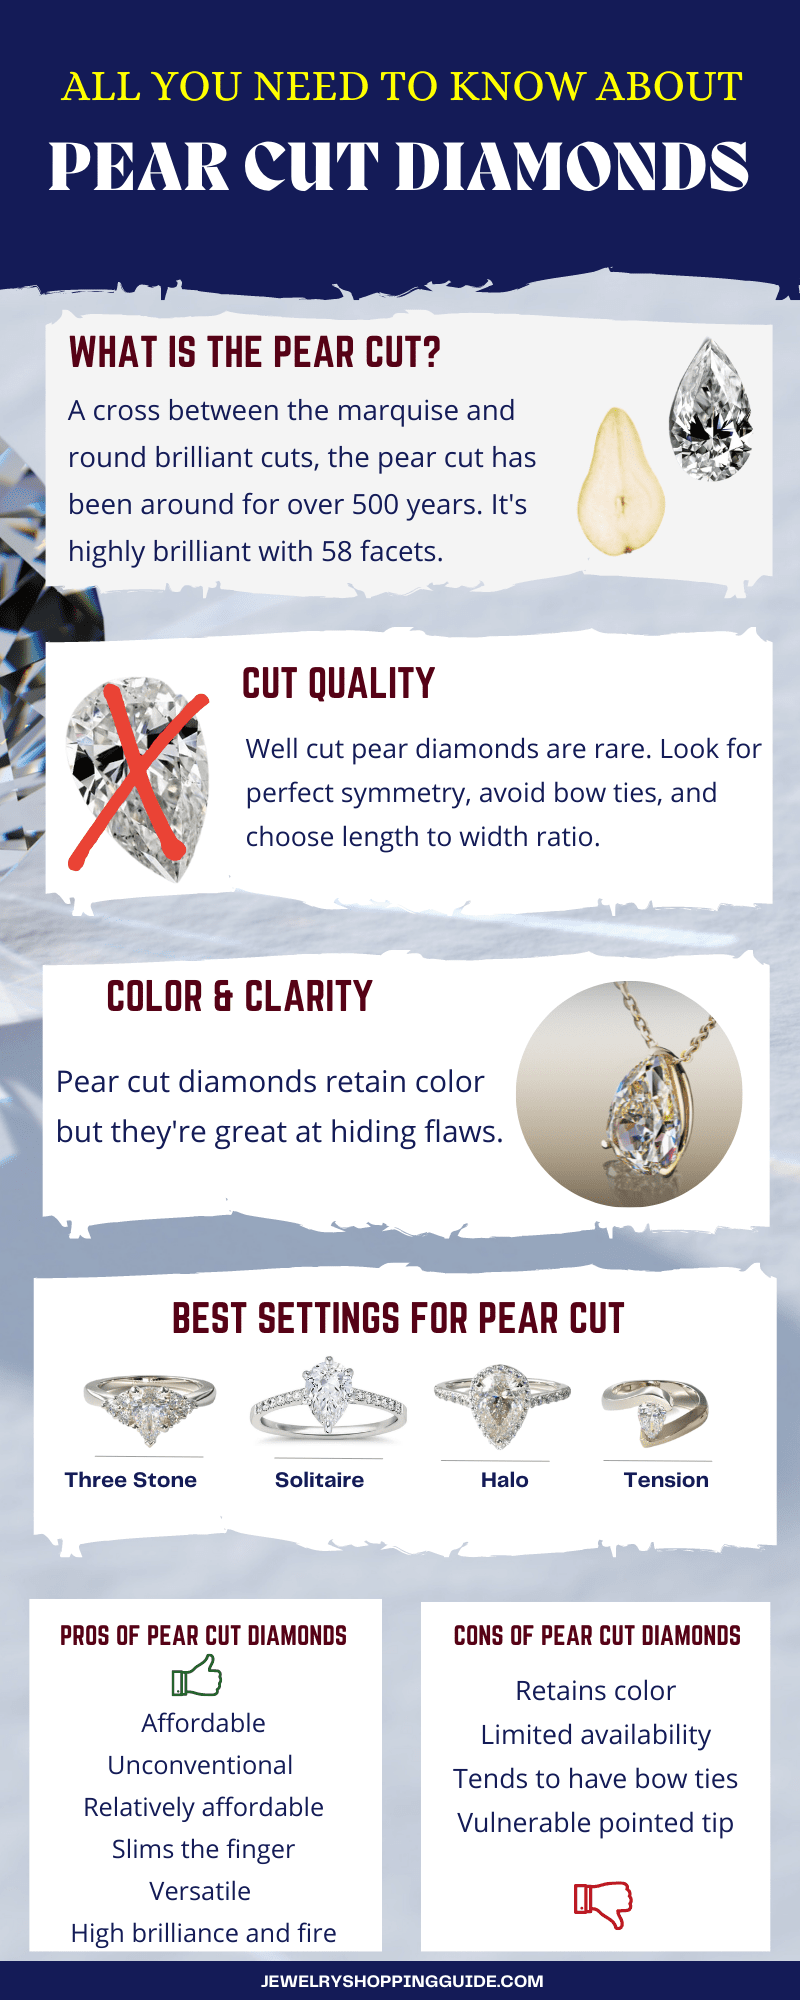 Pear cut buying guide